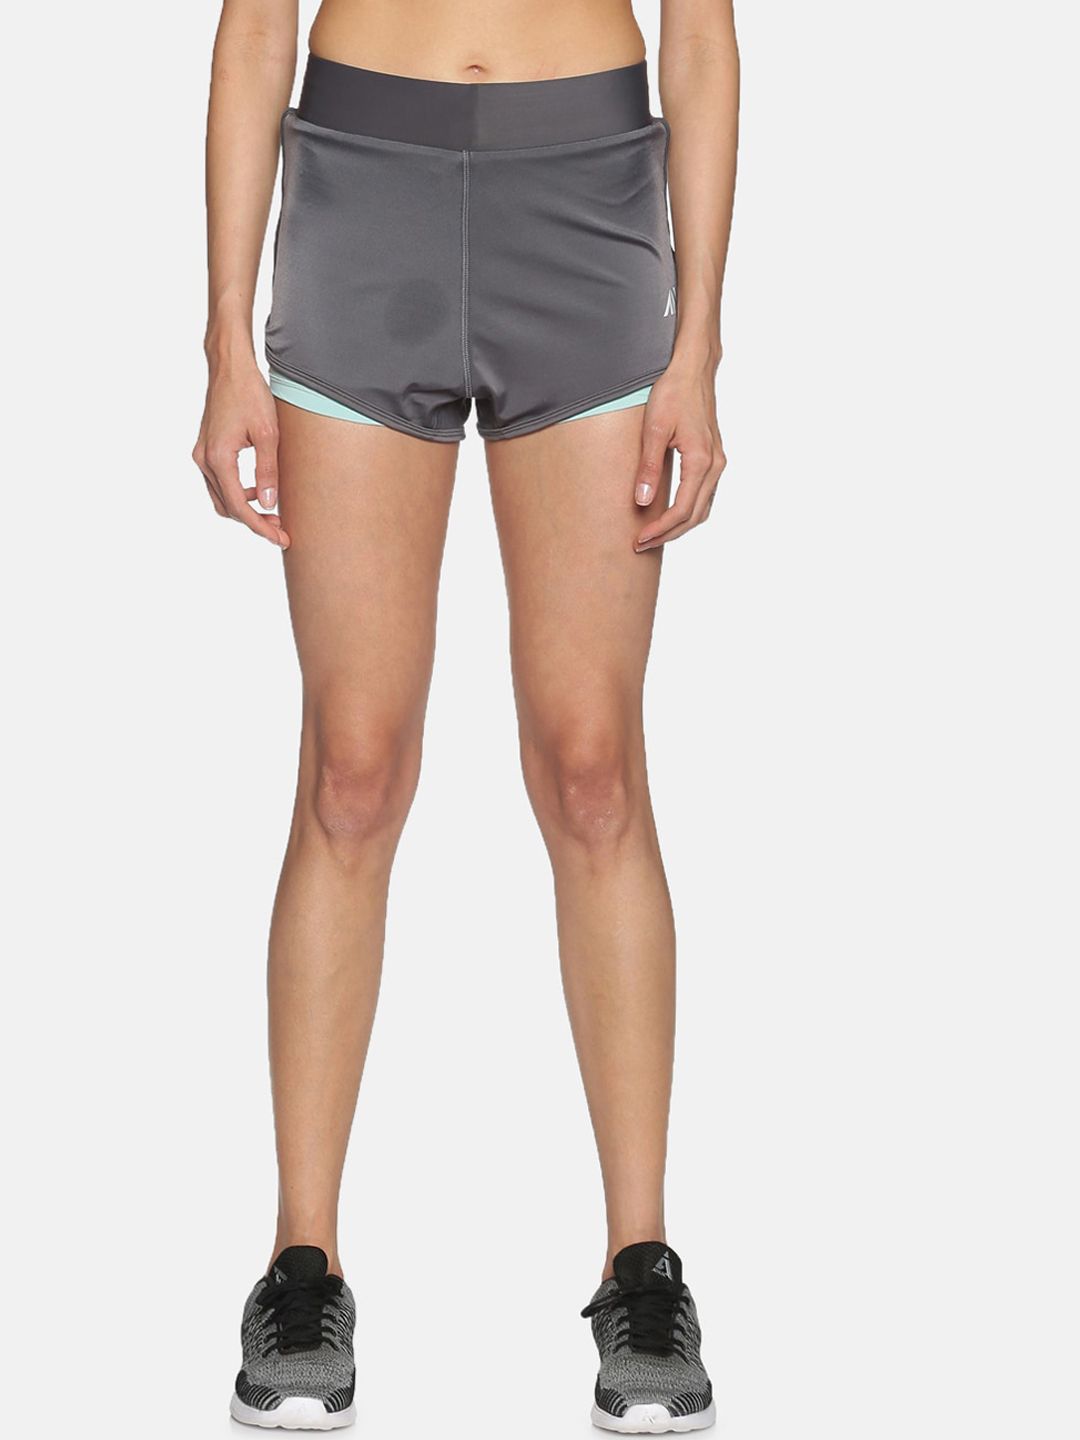 AESTHETIC NATION Women Grey Sports Shorts Price in India